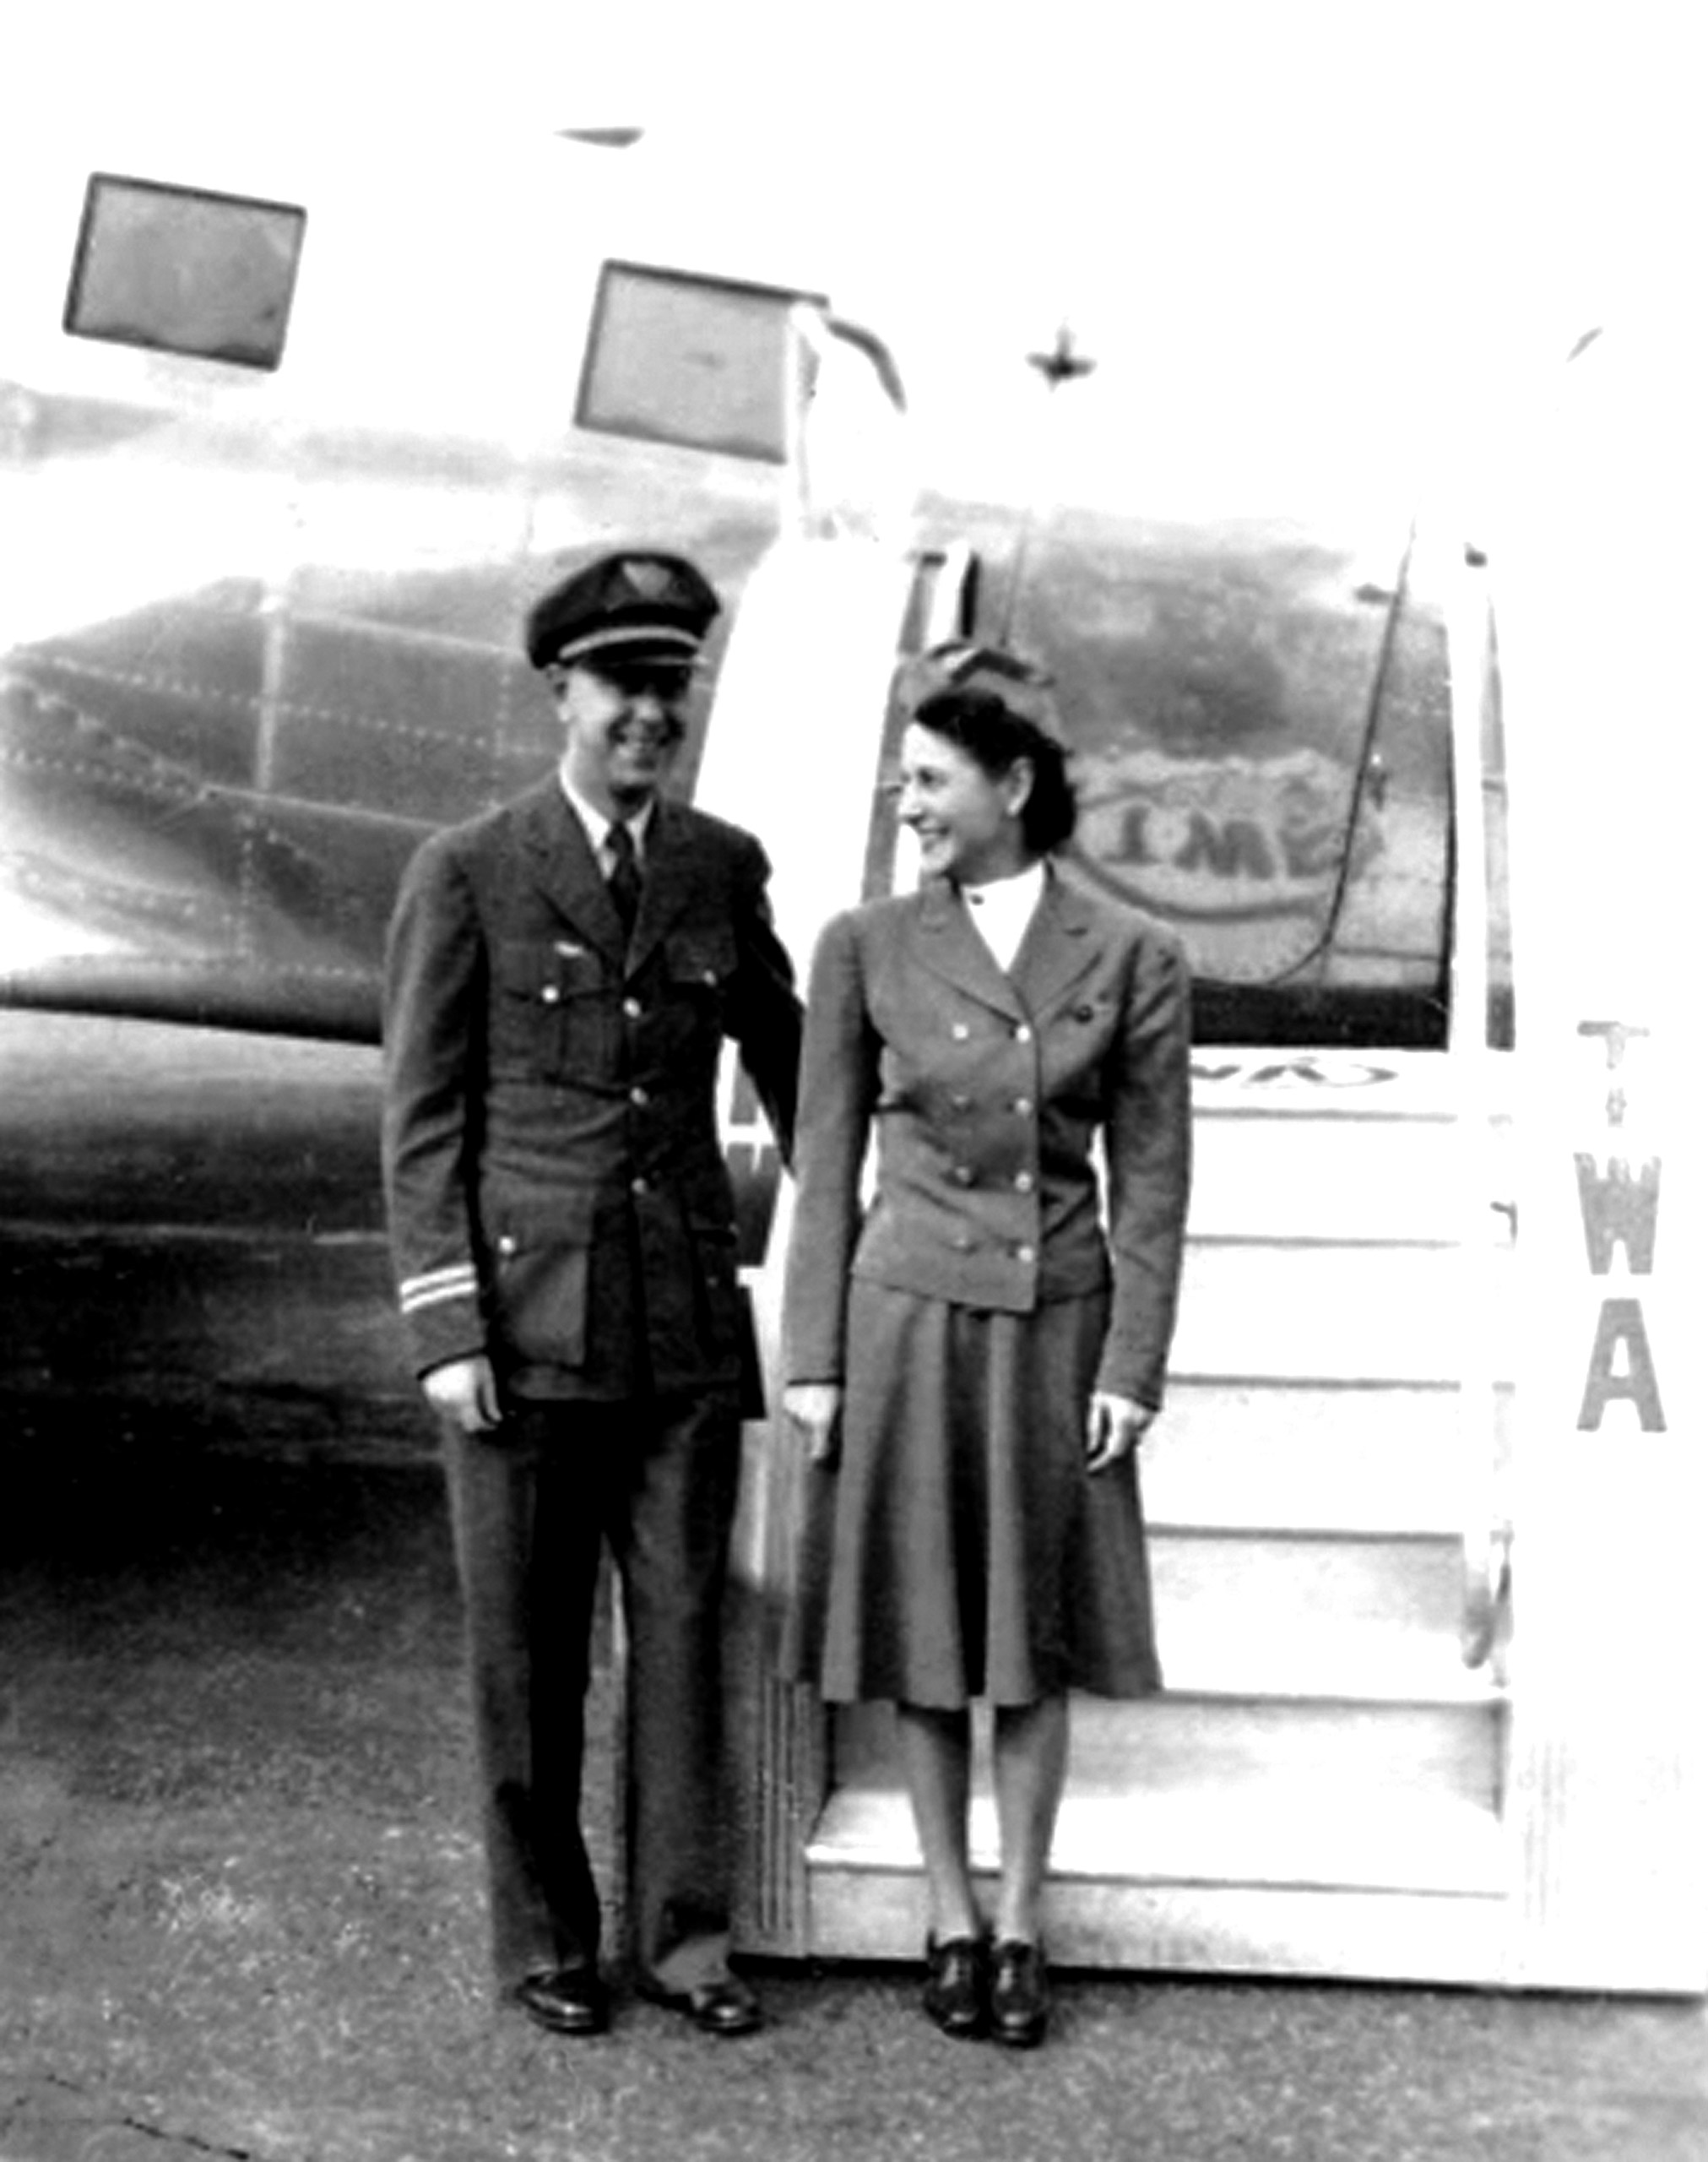 TWA air hostess Alice Getz poses with veteran Capt. Wayne Williams beside a DC-3. Both would be killed in the crash of TWA Flight 3.